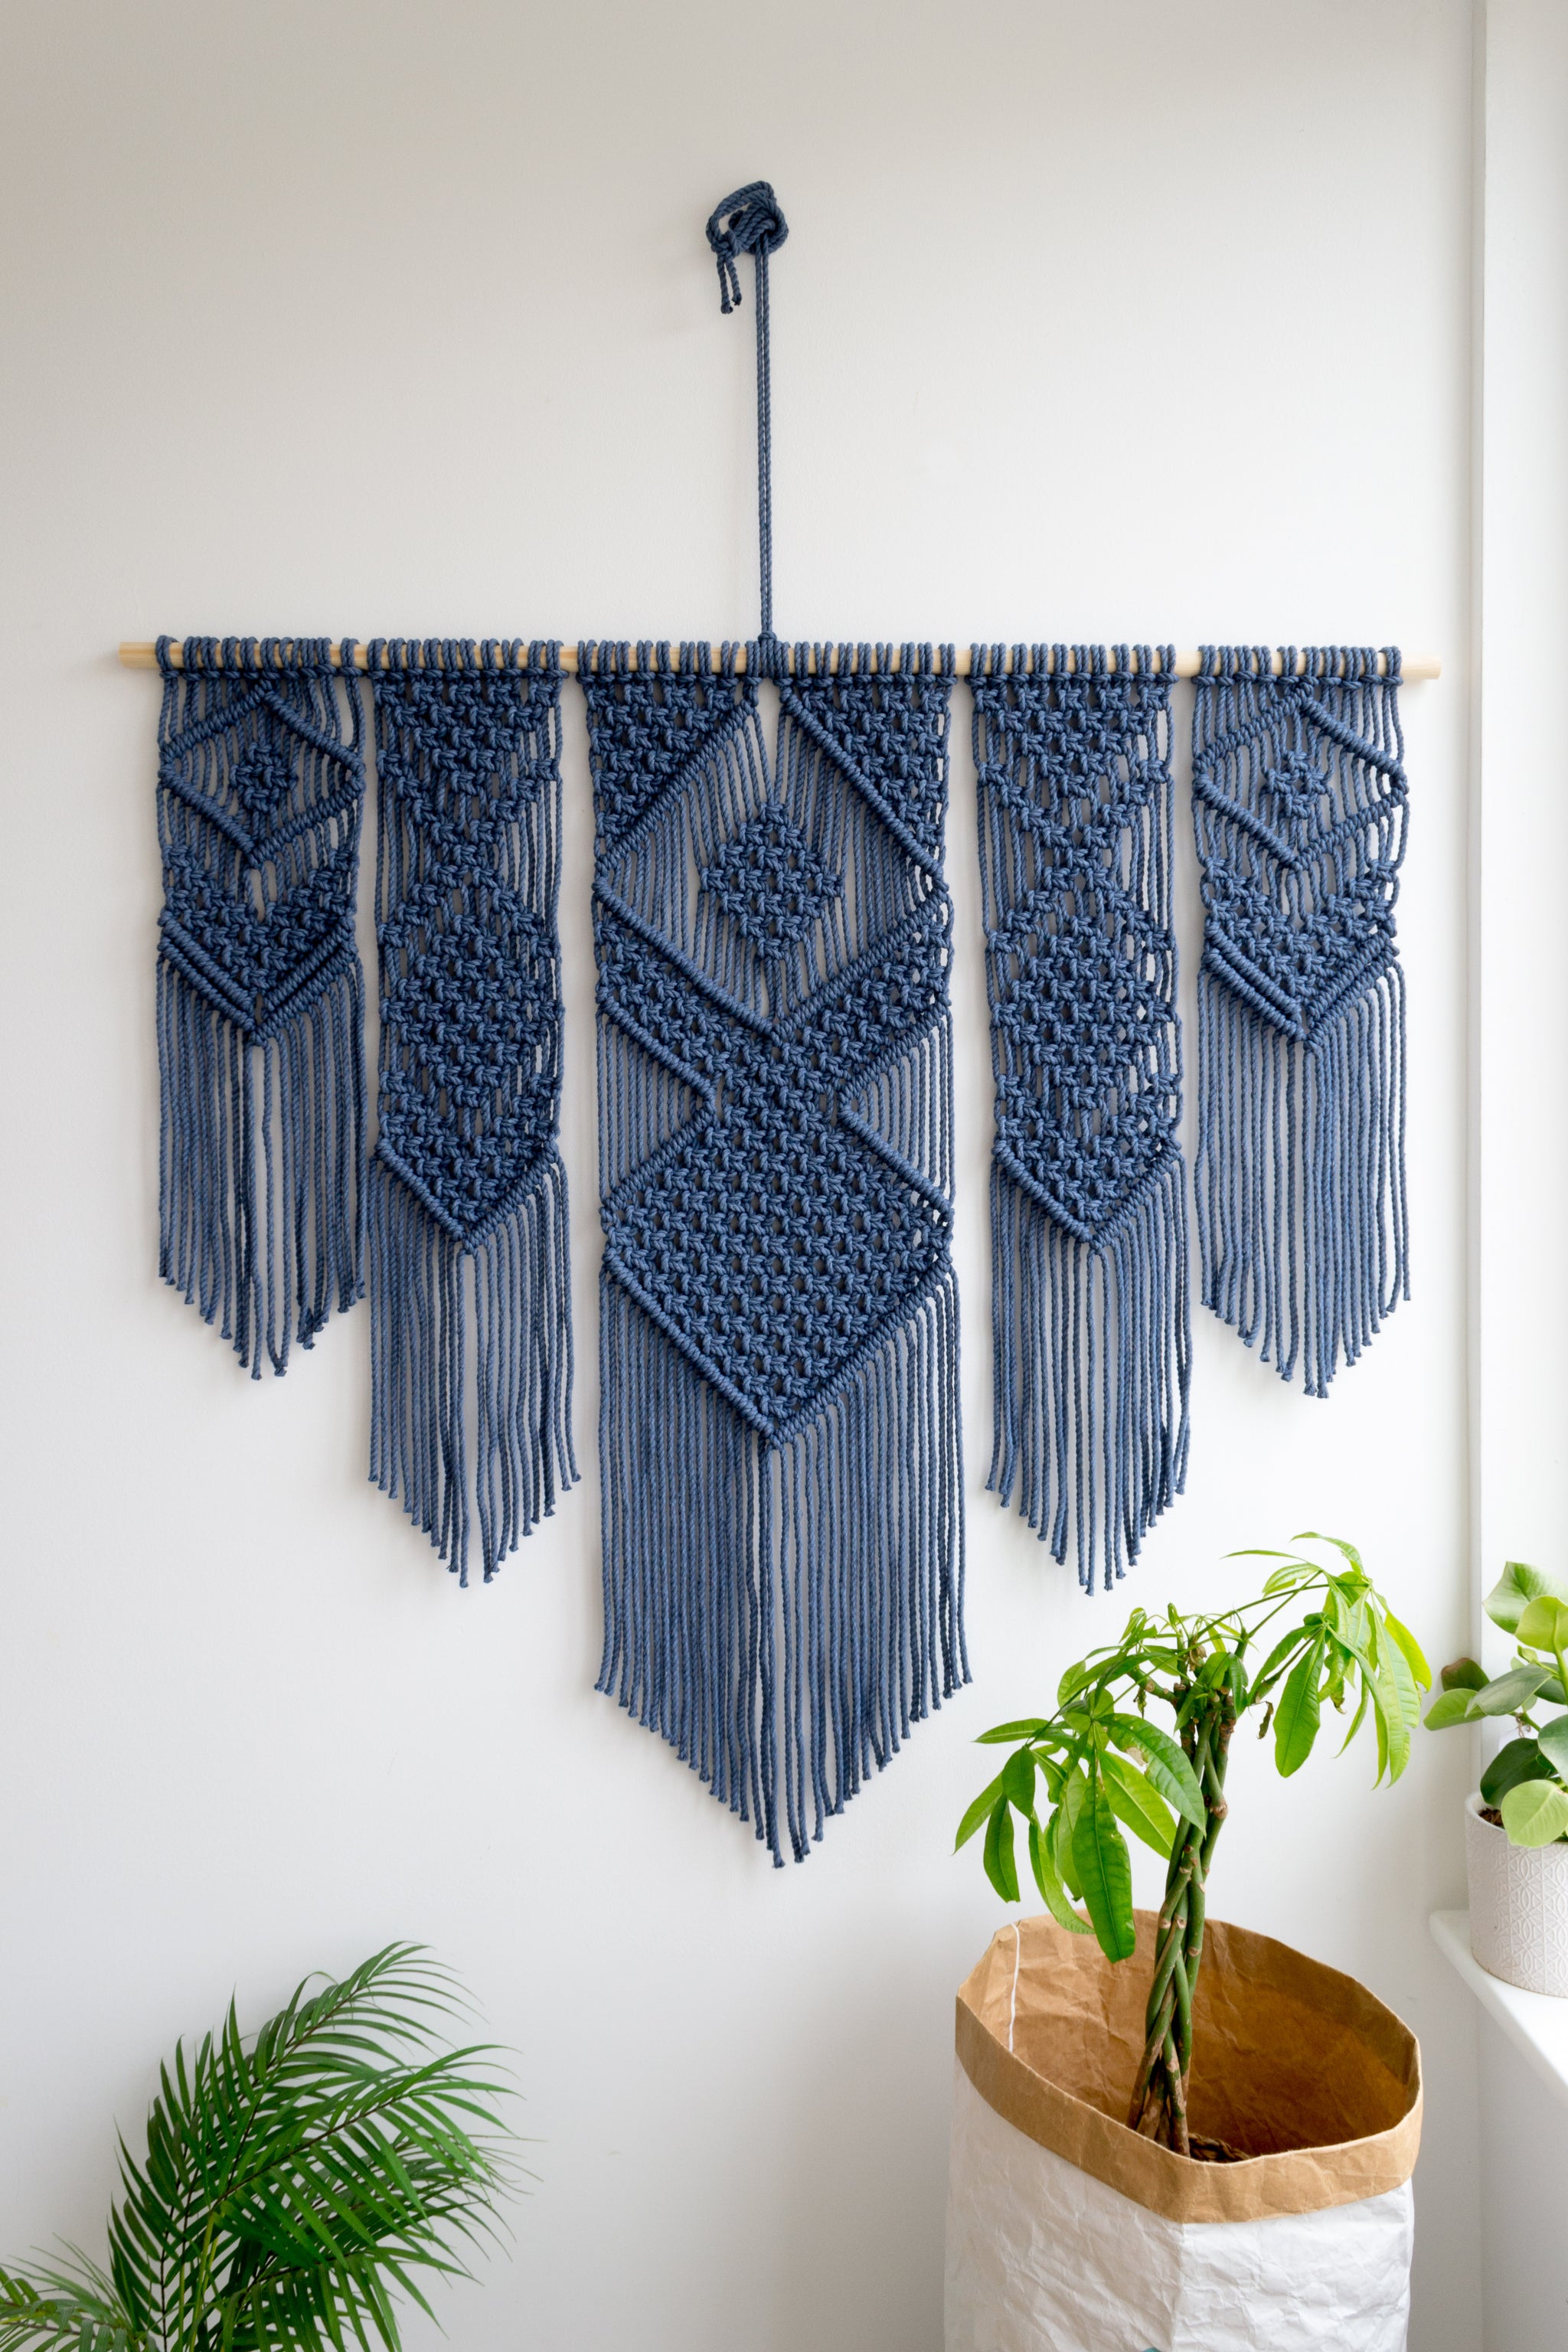 Macrame Wall Hanging 'IVY' - DIY KIT - Available in multiple color